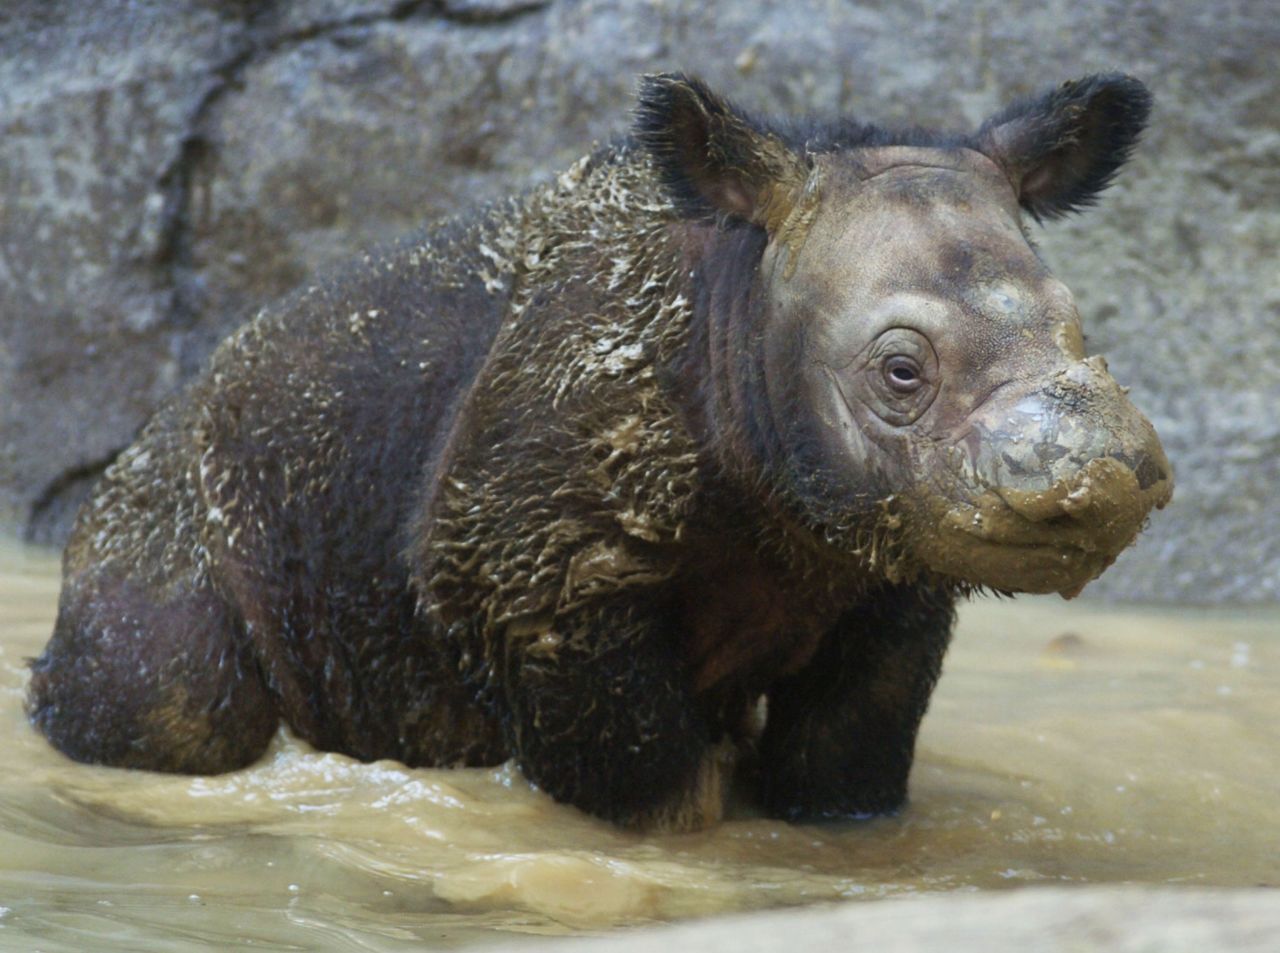 Sumatran rhino populations are extremely threatened by poaching, the WWF says.